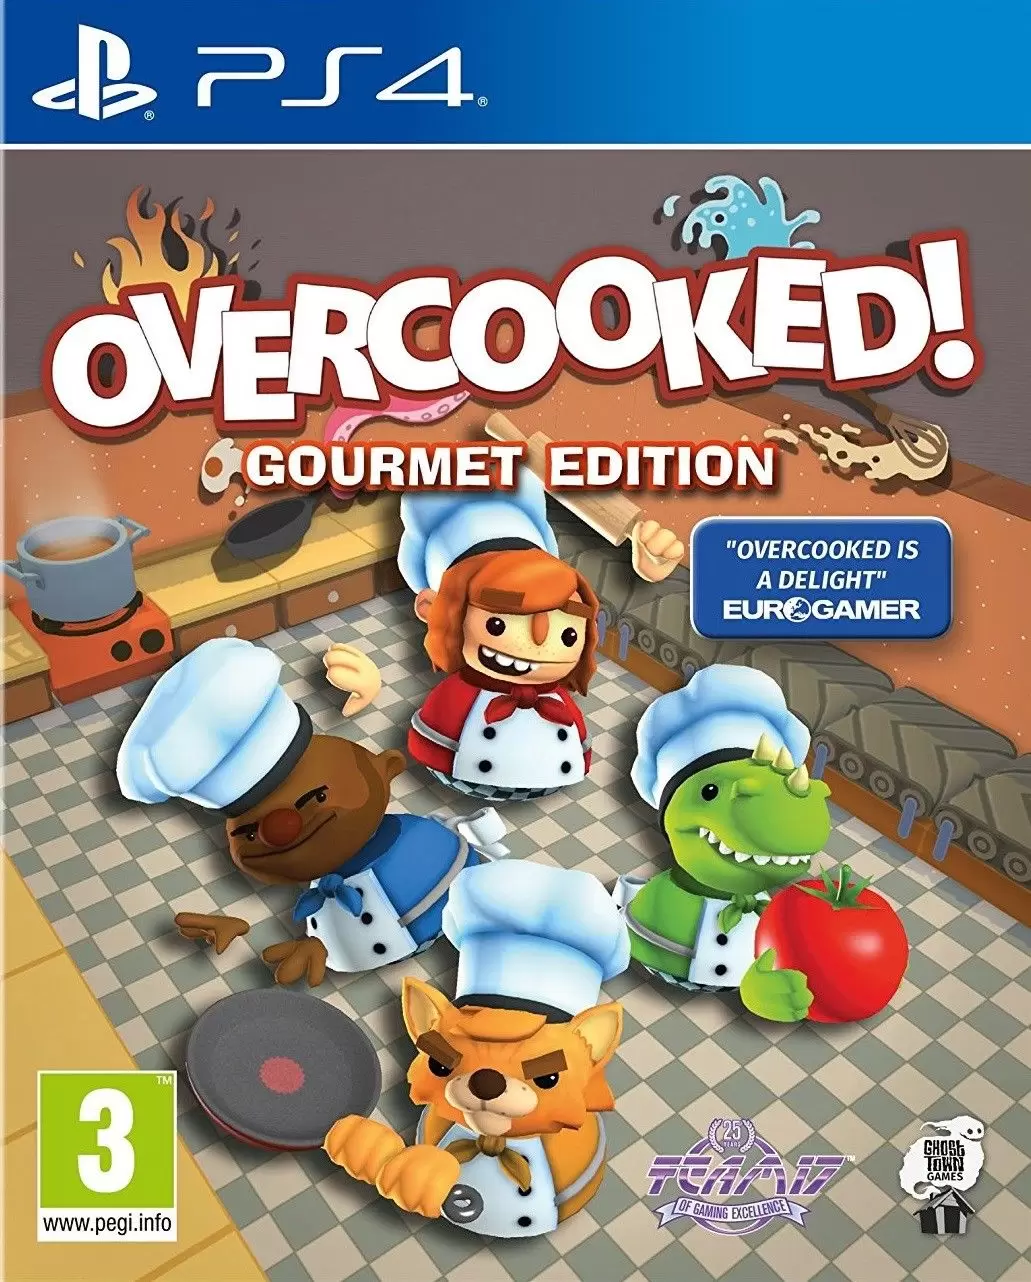 PS4 Games - Overcooked: Gourmet Edition